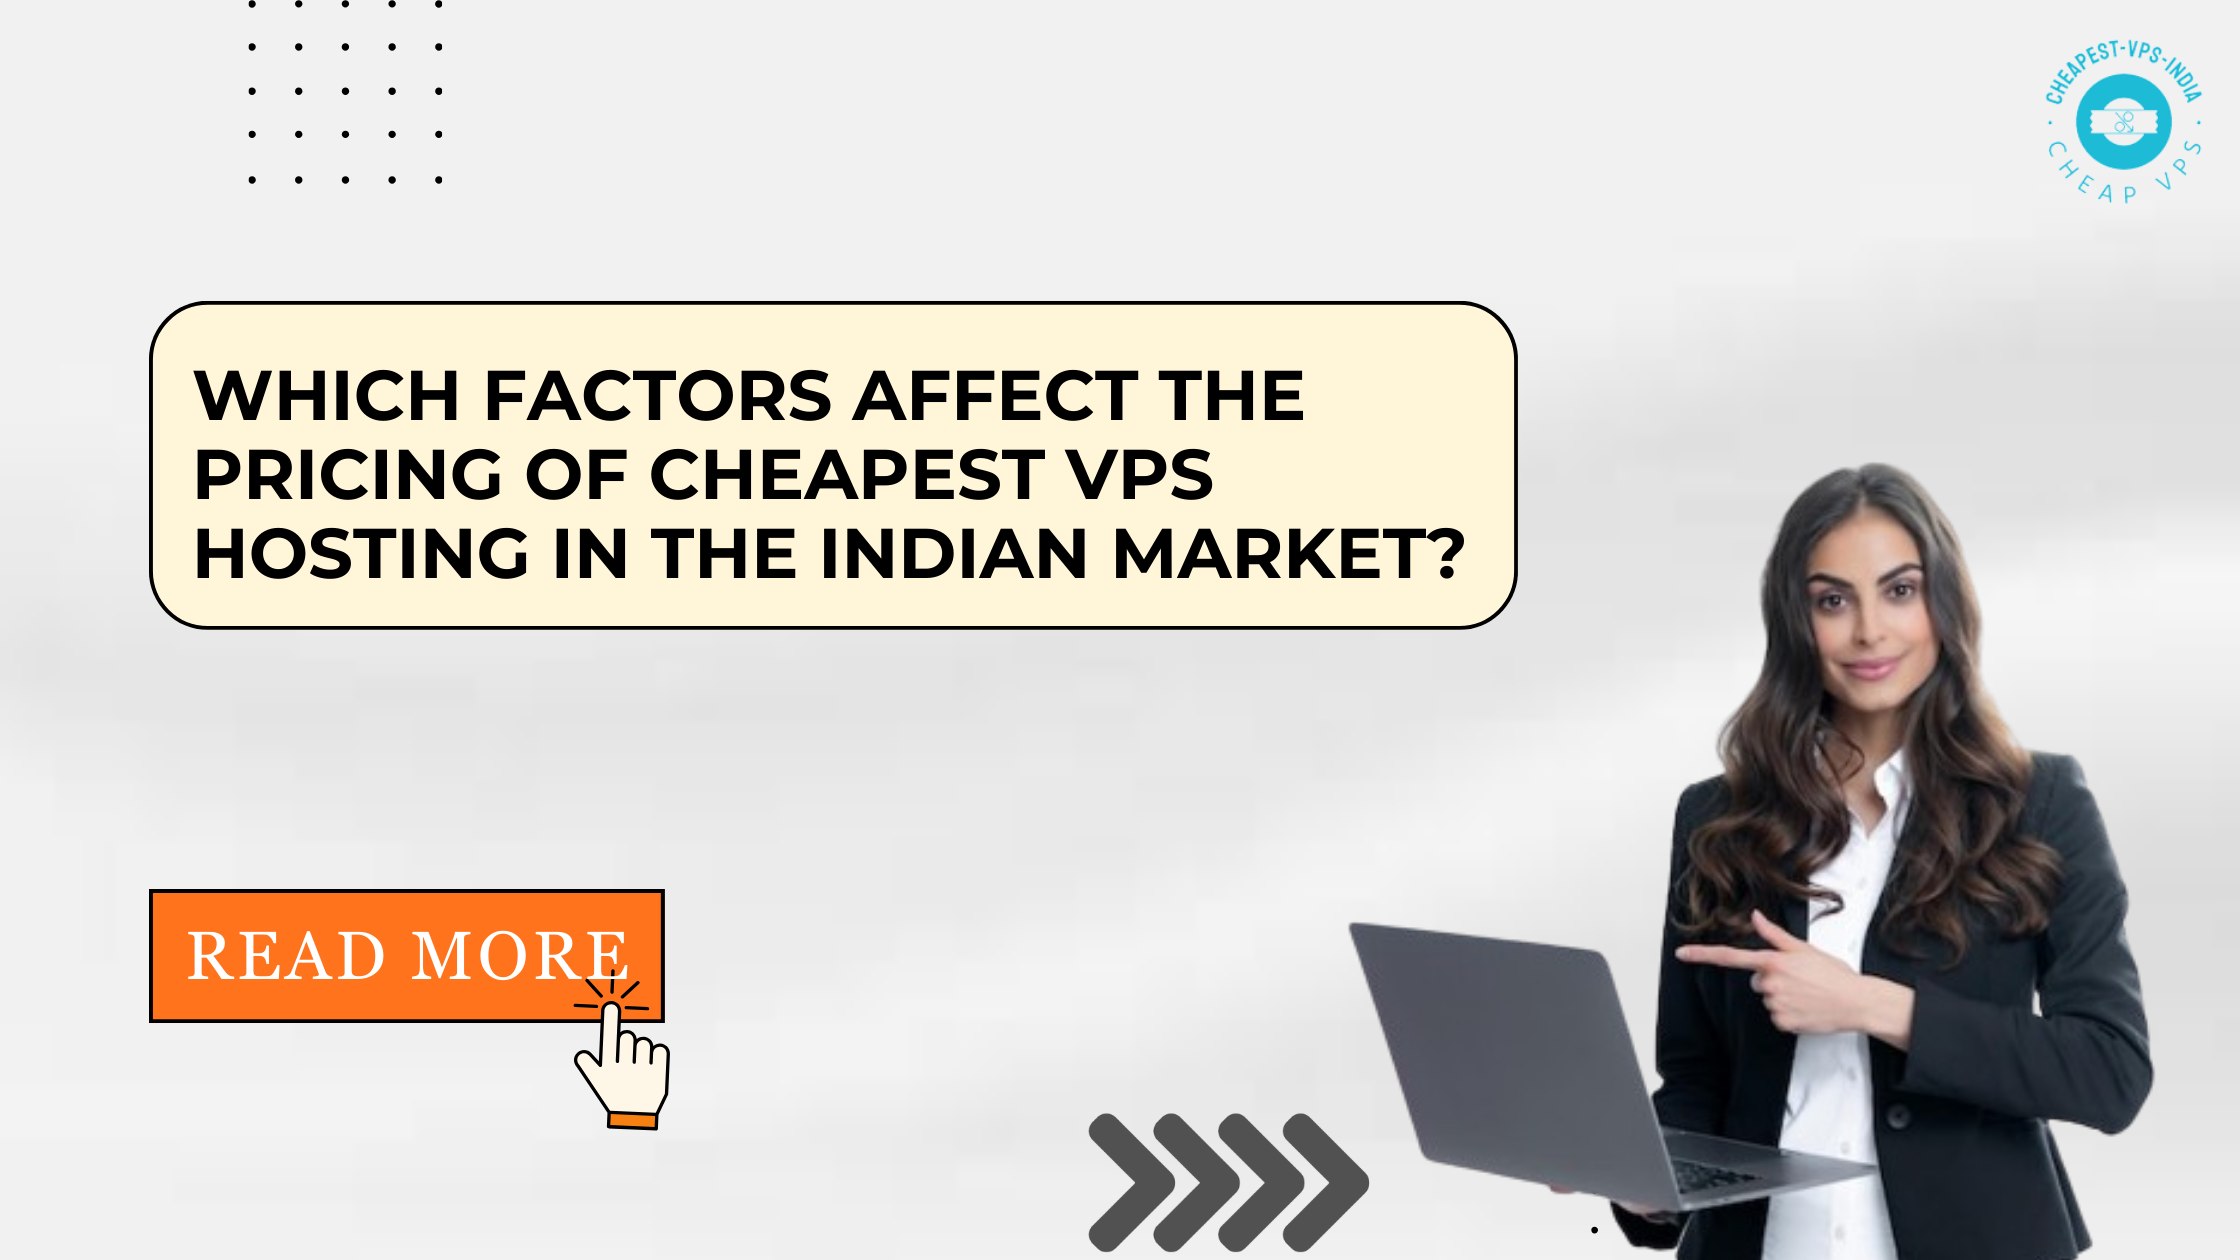 Which Factors Affect the Pricing of Cheapest VPS Hosting in the Indian Market